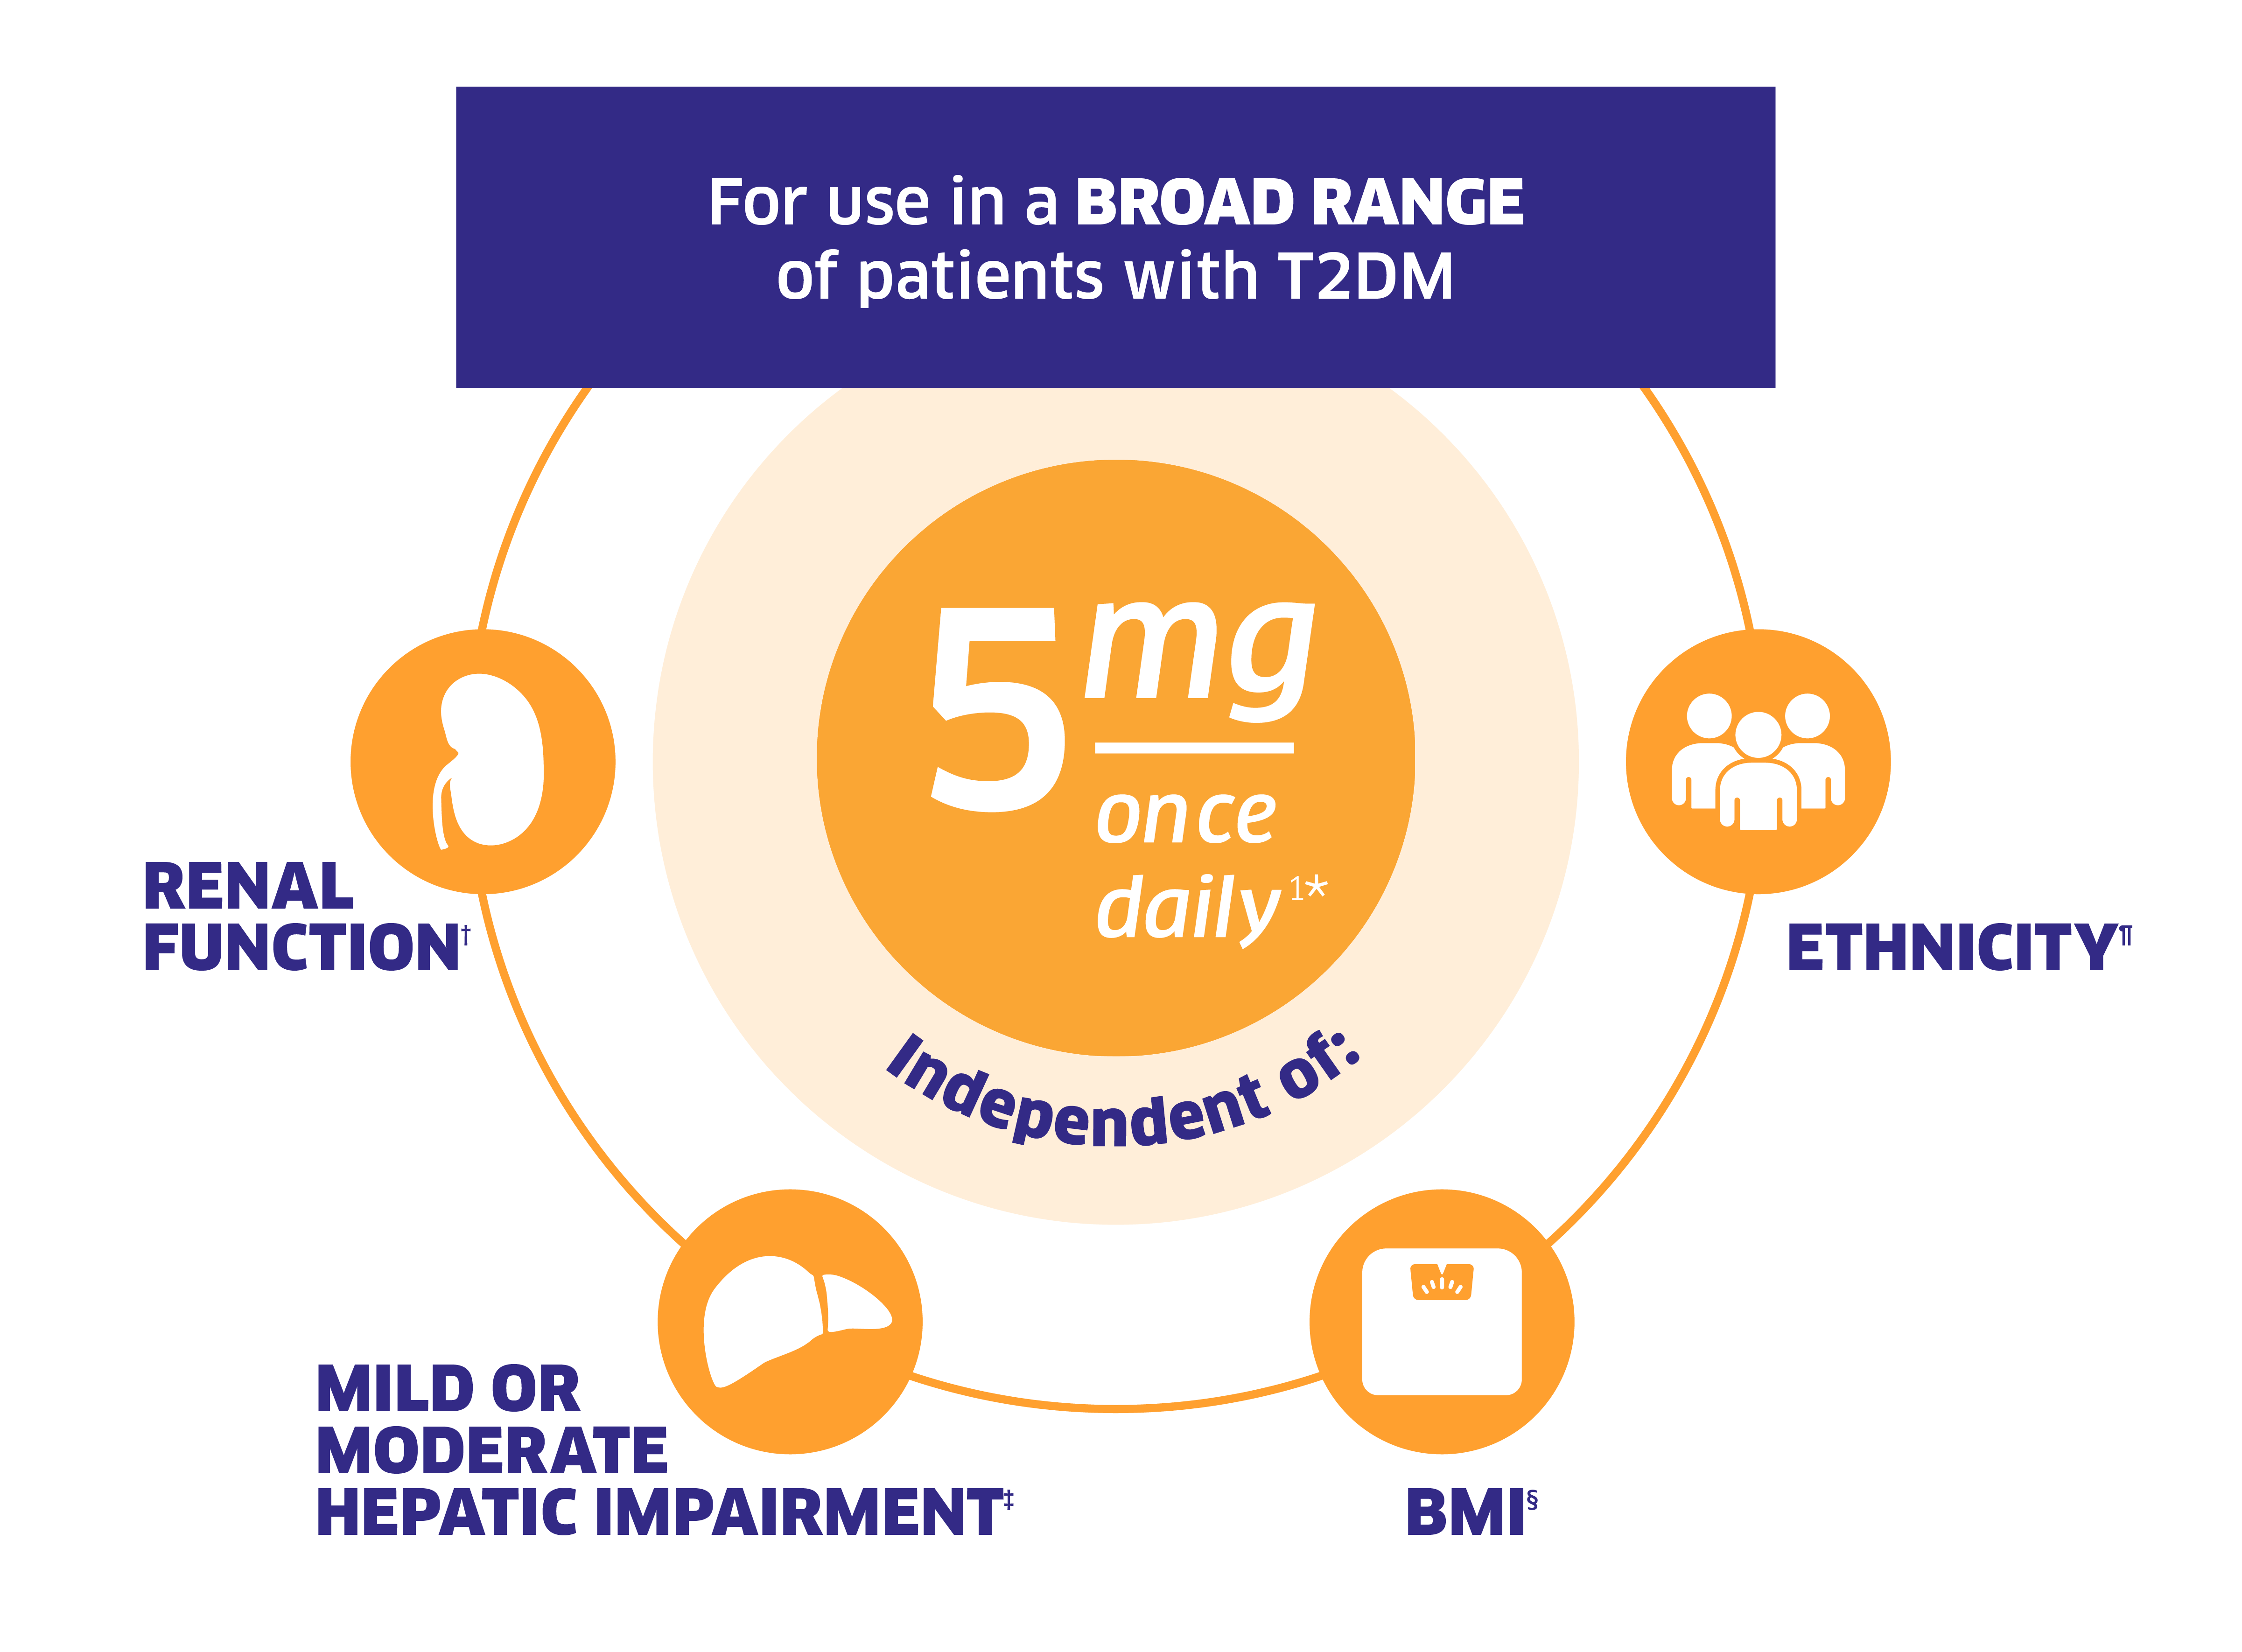 For use in a broad range of patients with T2DM. 5 mg once daily independent of renal function,(no dose adjustment required for patients with renal impairment. Use with caution in patients with ESRD and those on dialysis), mild or moderate hepatic impairment, (no dose adjustment required for patients with mild and moderate hepatic impairment. Not recommended in patients with severe hepatic impairment), BMI (no dose adjustment required based on BMI), or ethnicity (no dose adjustment required based on race. Race had no obvious effect on the plasma concentrations of linagliptin based on a composite analysis of available pharmacokinetic data).